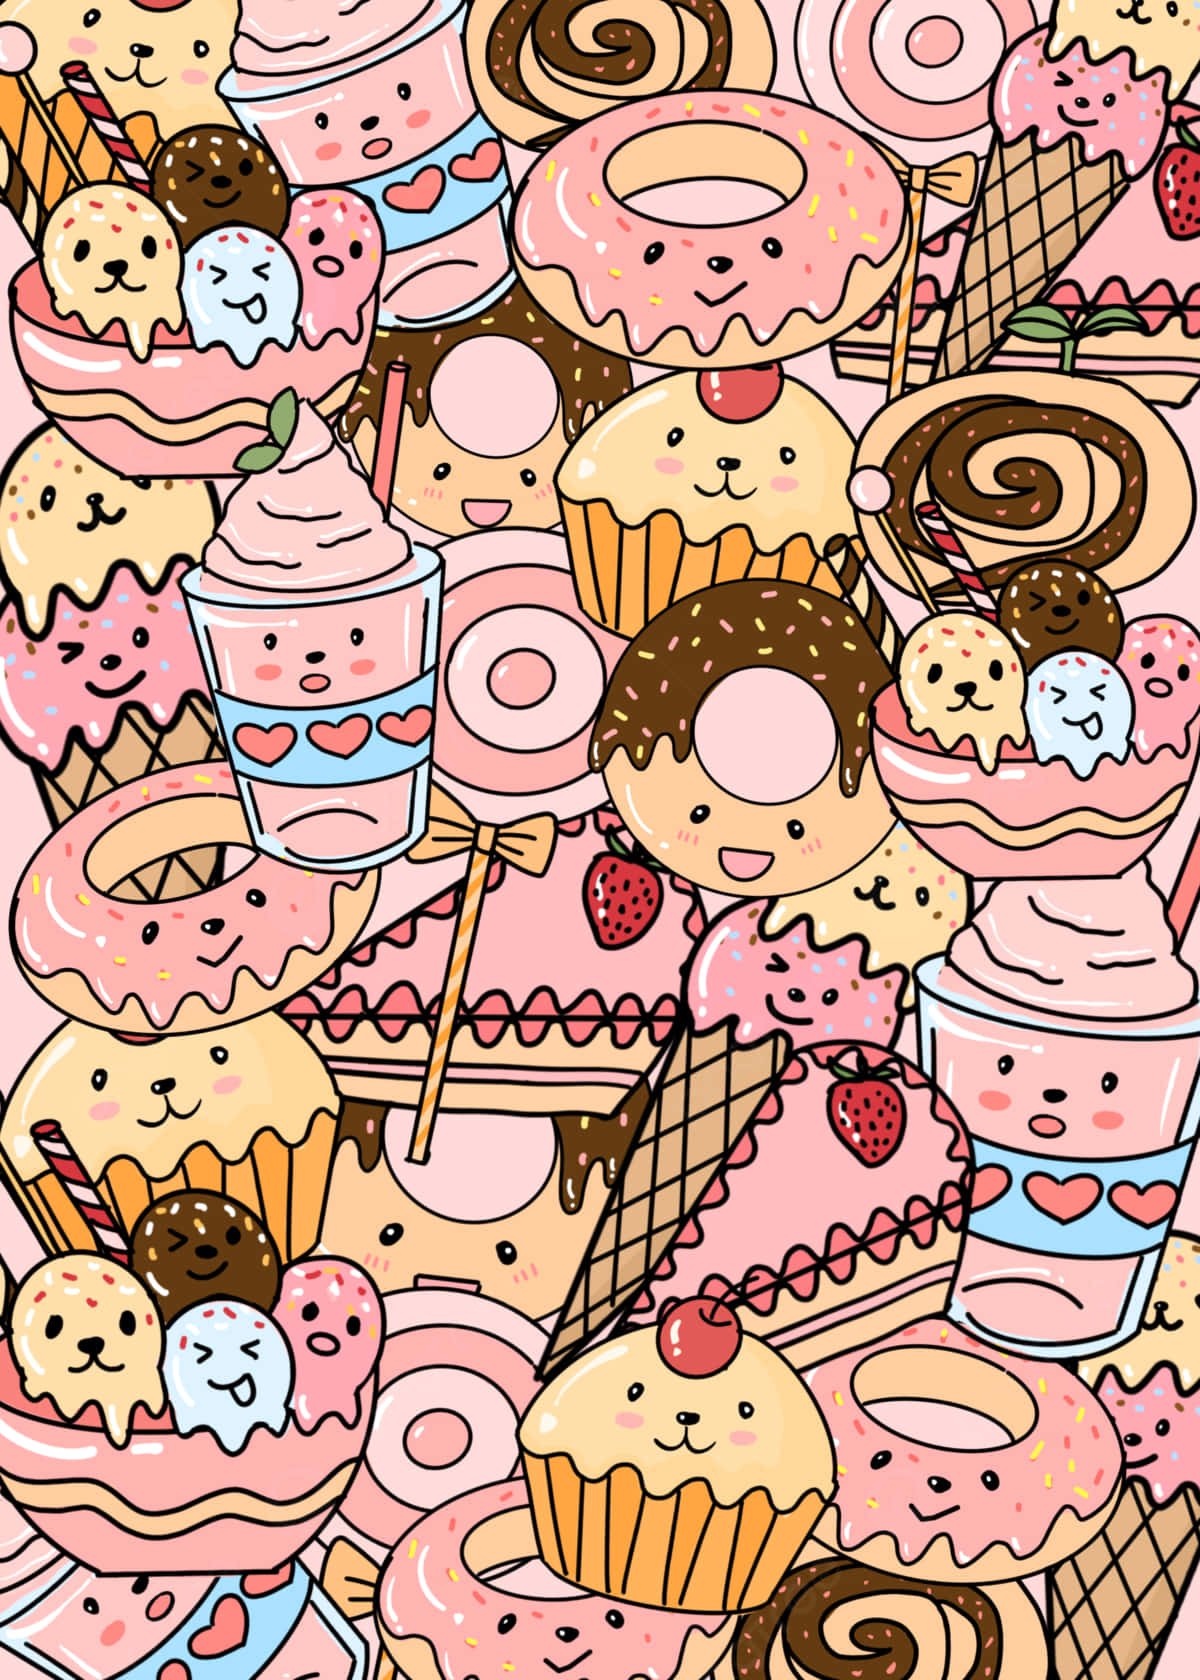 Delicious Overload - Cute Dessert with Colorful Toppings and Sauce Wallpaper